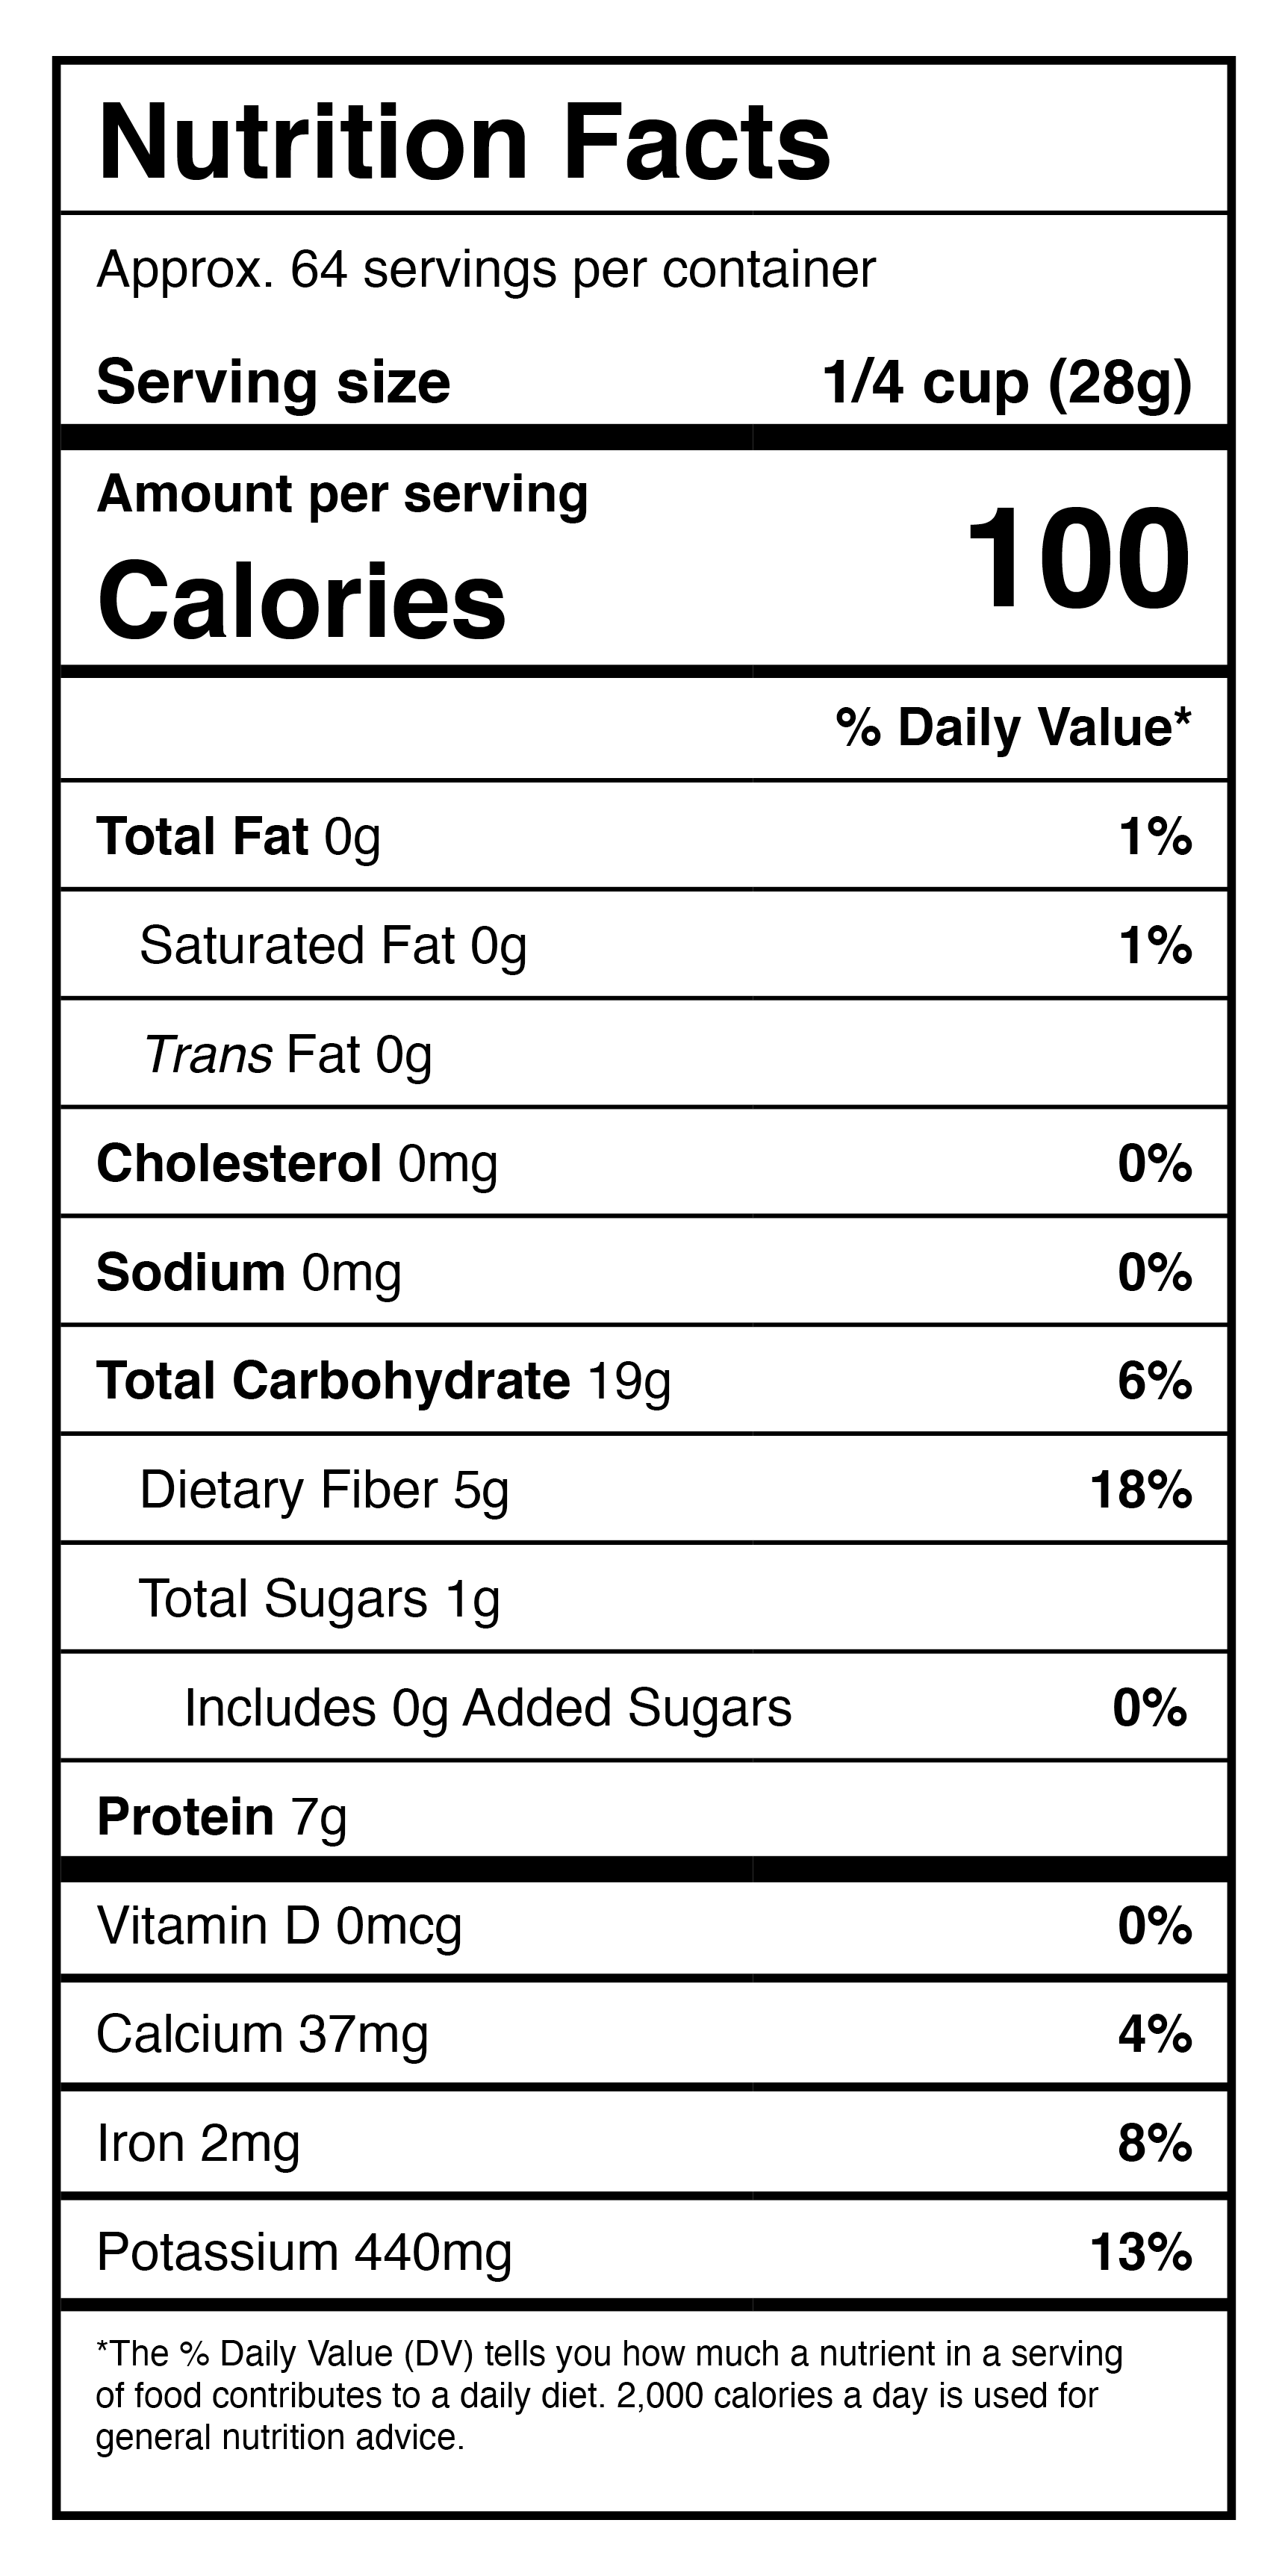 A nutrition label showing the nutrition facts of Harmony House Black Beans (4 lbs) - (SHIPS IN 1-2 WEEKS).